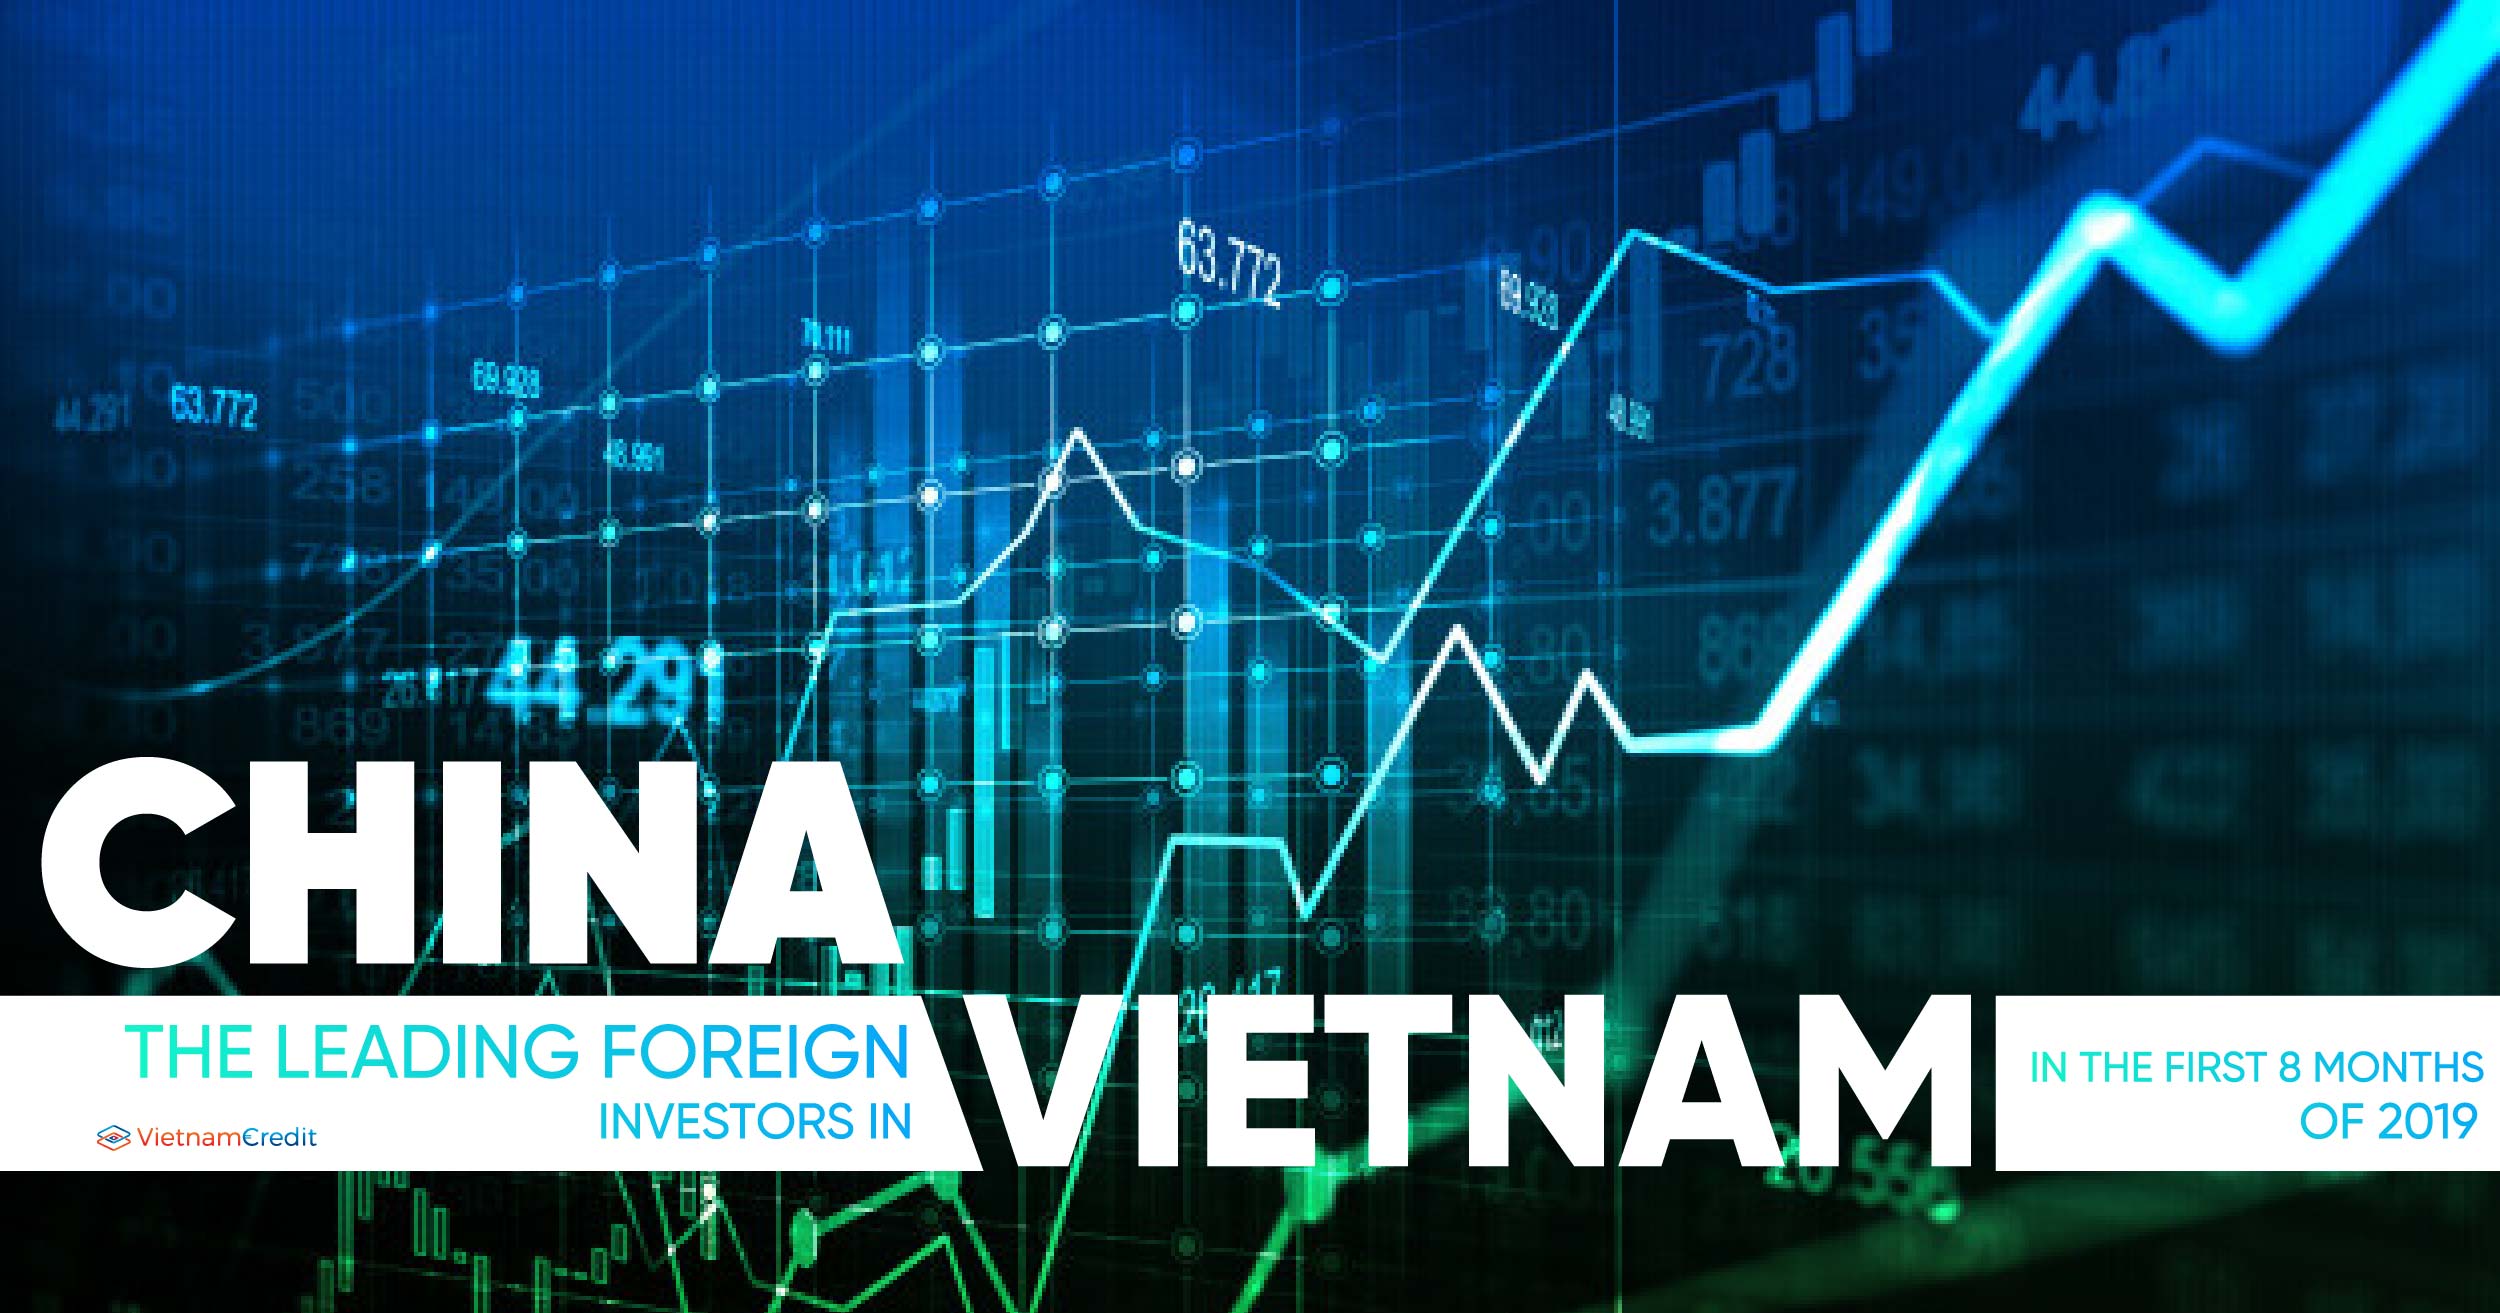 China, the FDI leader in Vietnam after 8 months of 2019